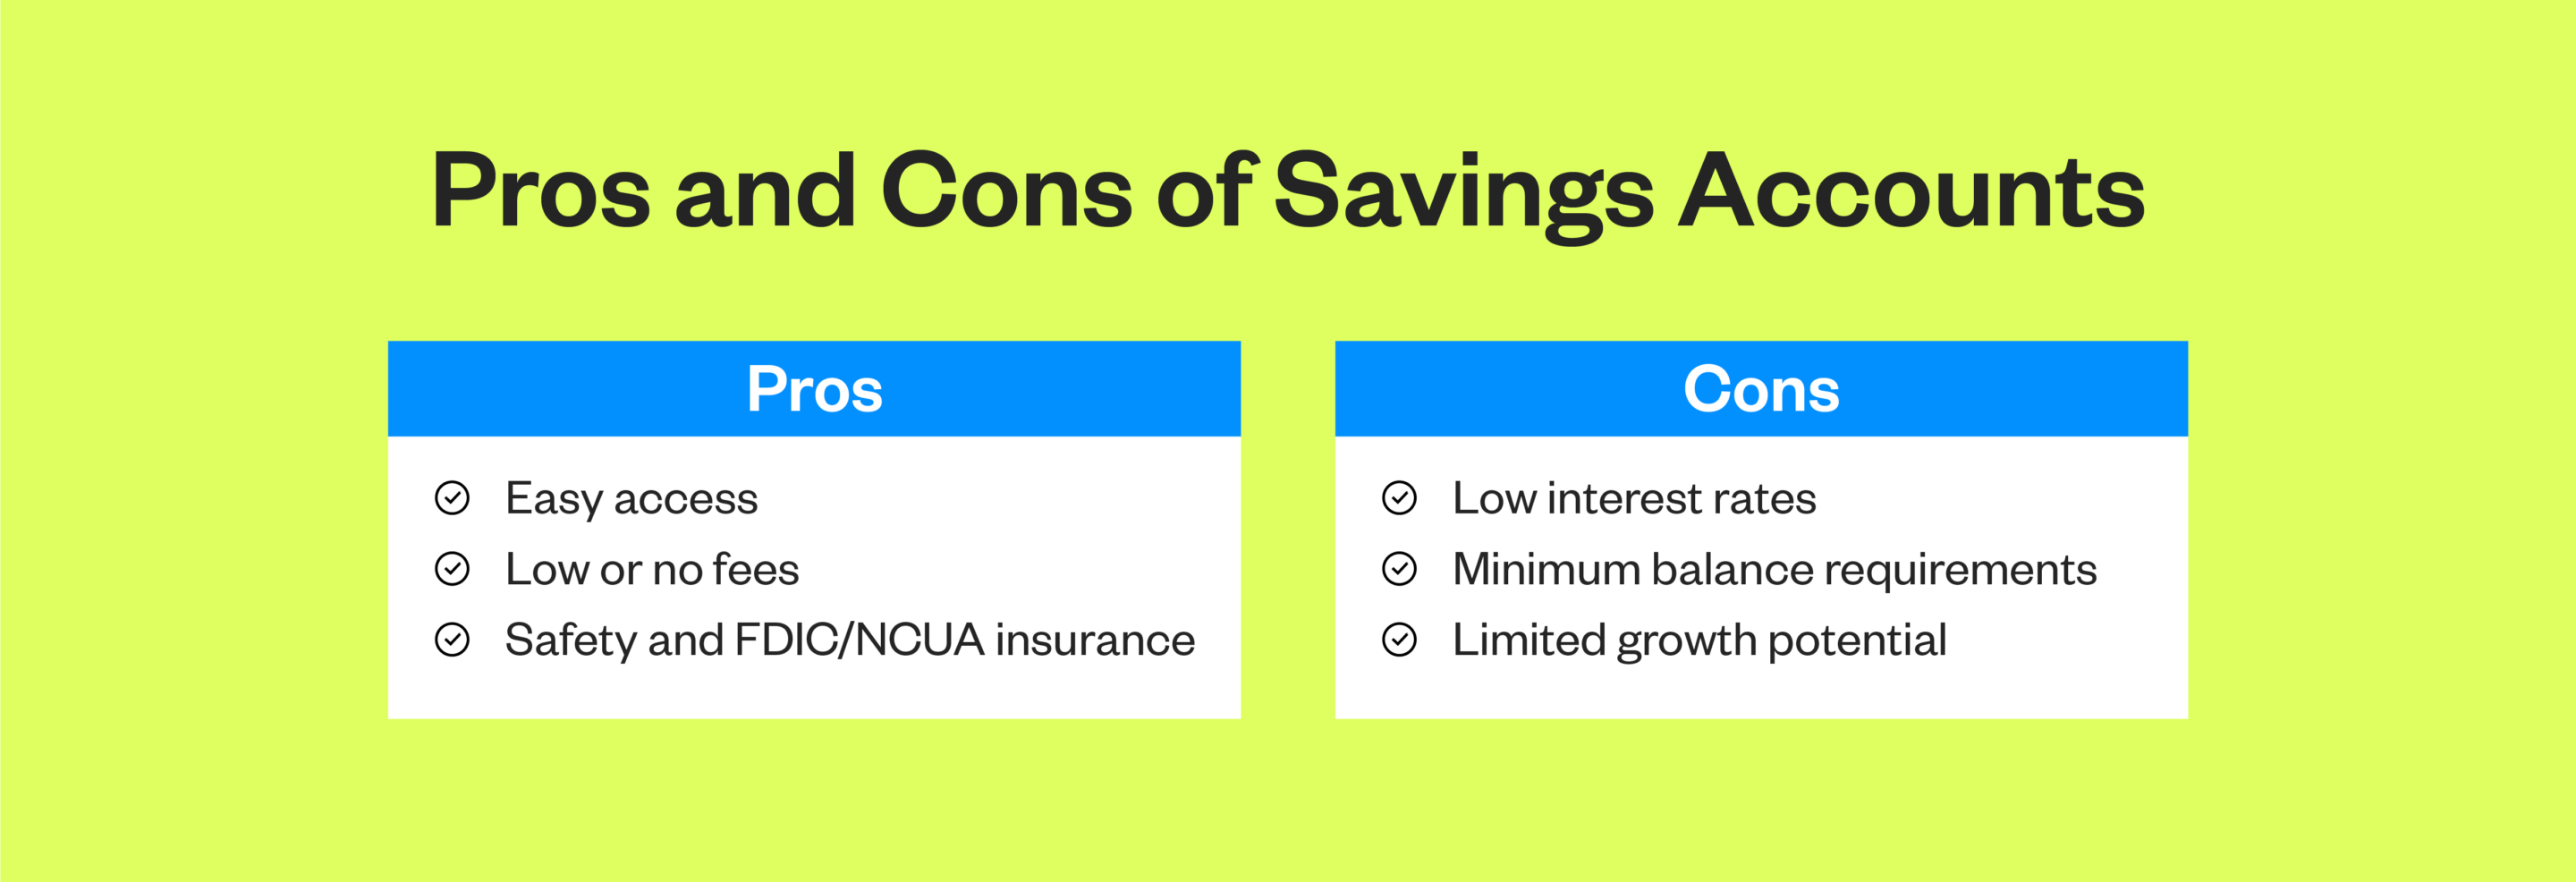 Pros and cons of savings accounts